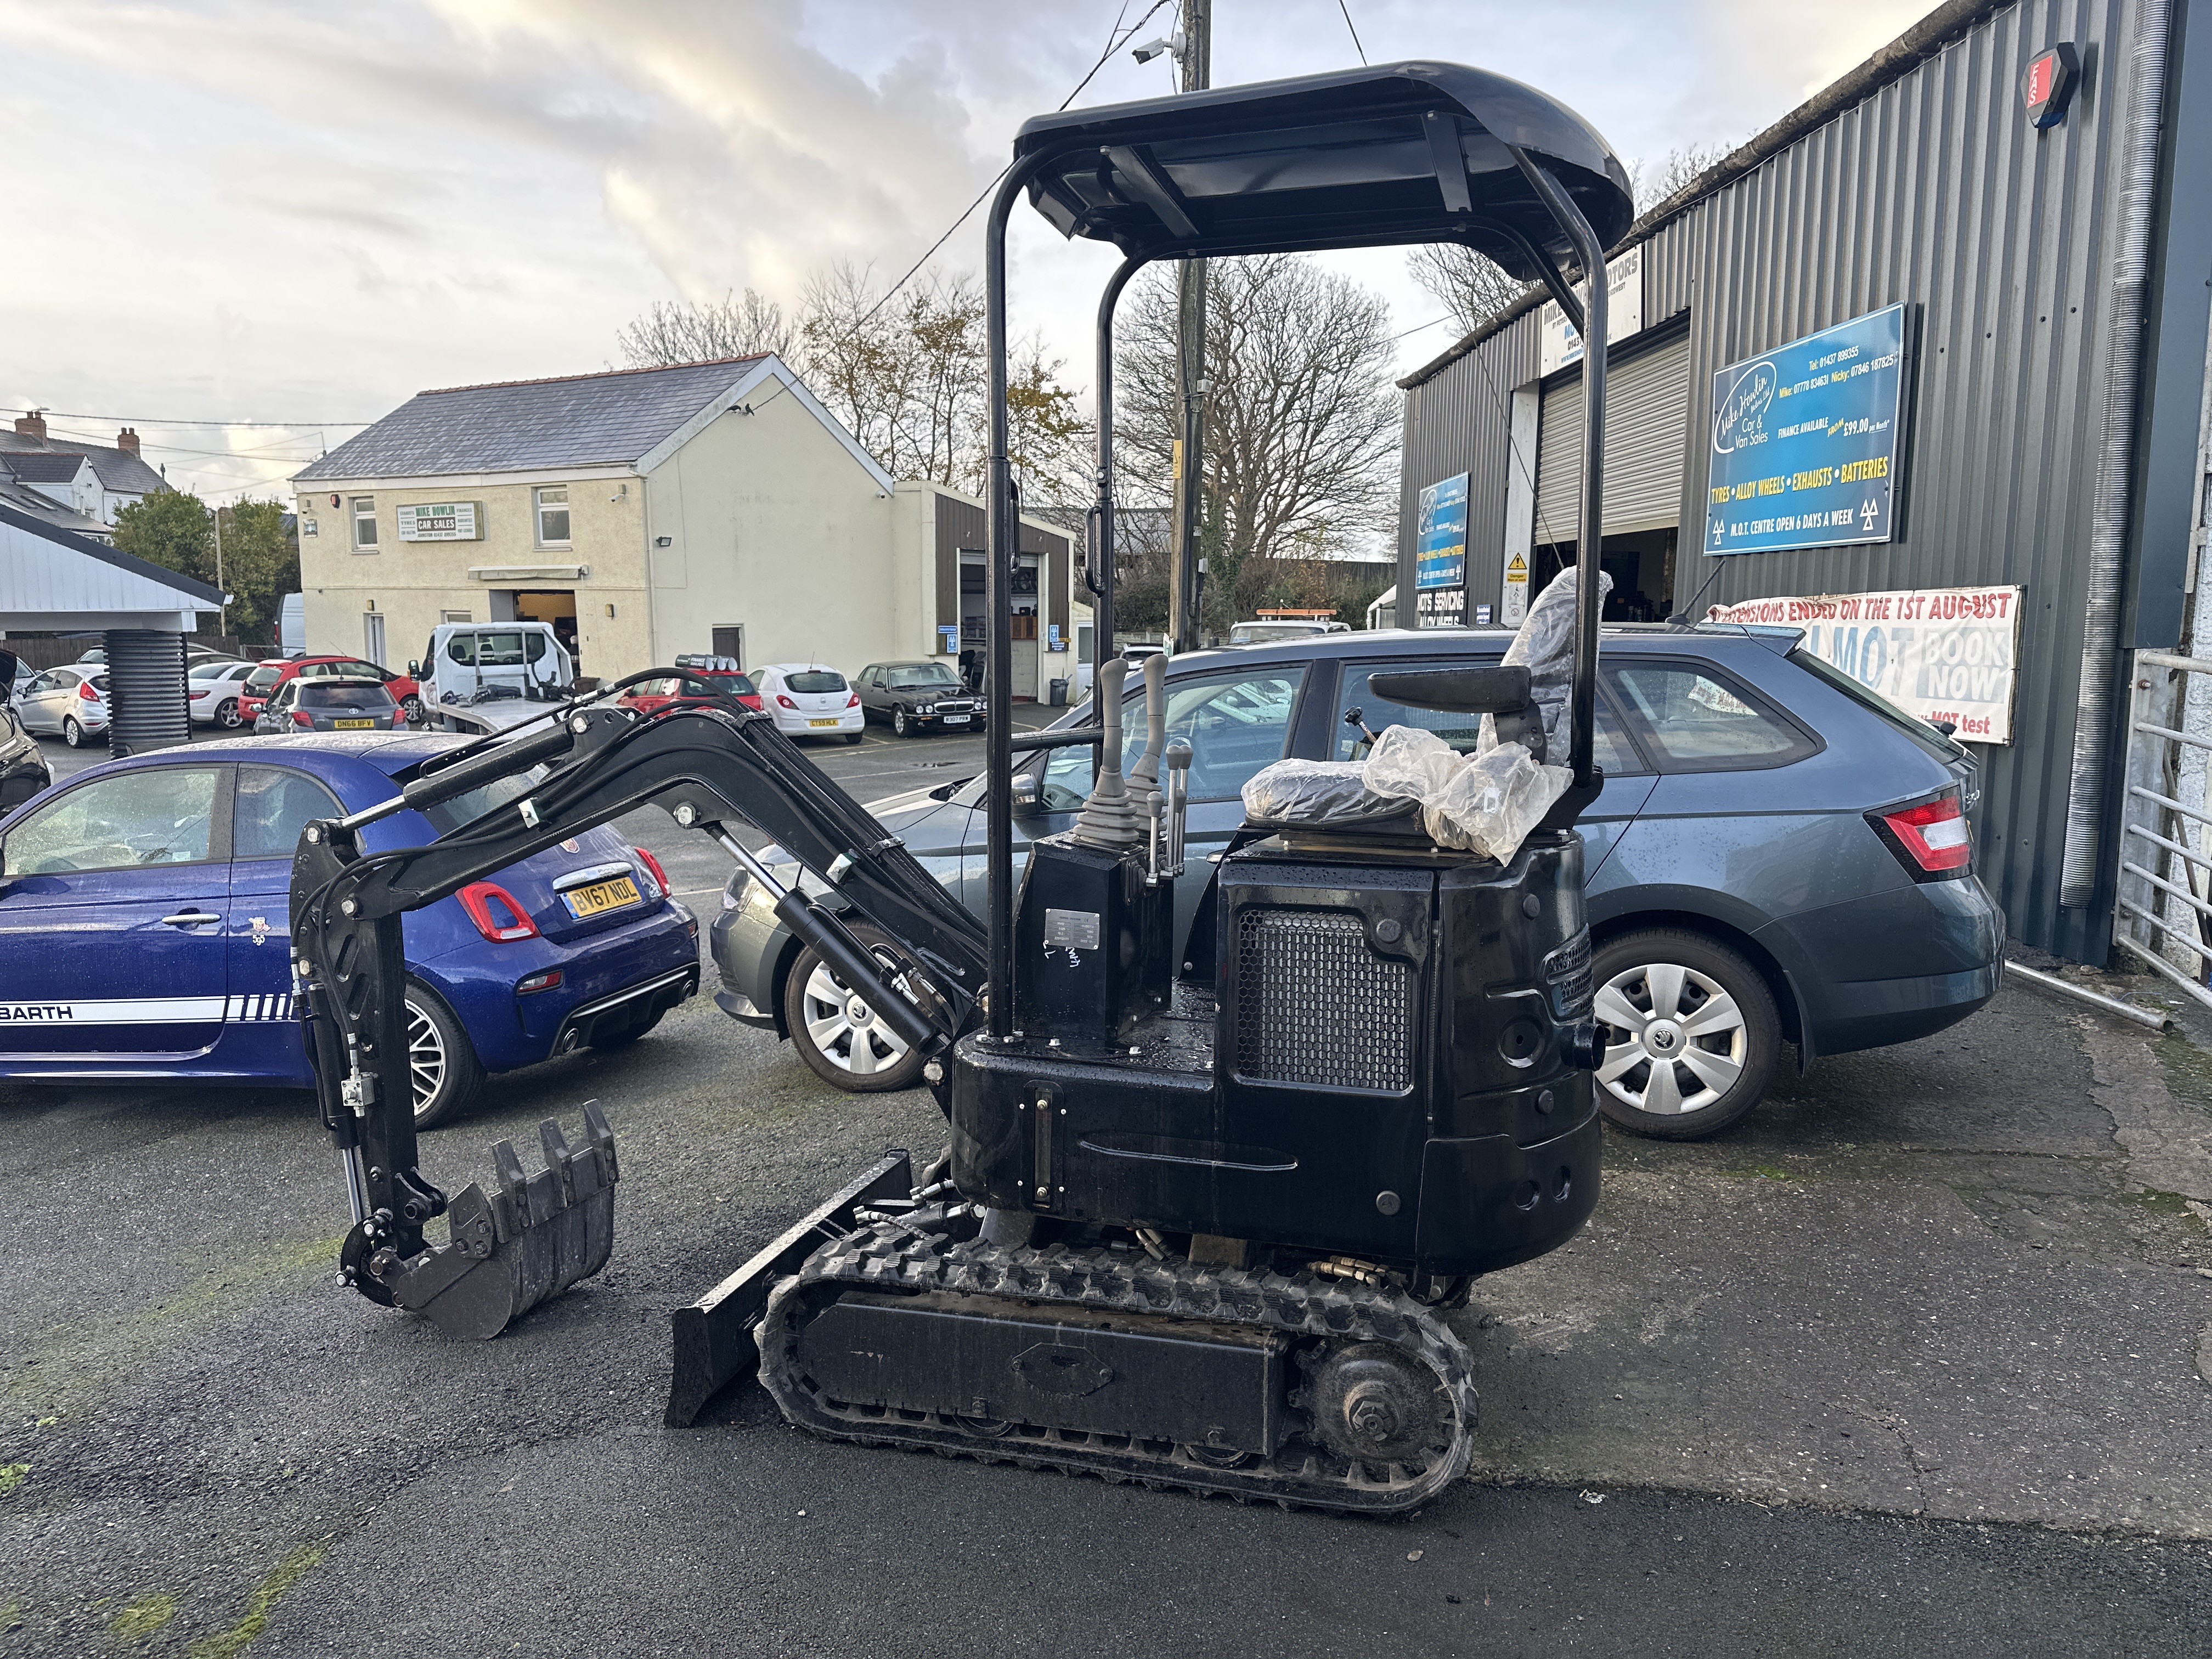  HARDLIFE XN12 MINI EXCAVATOR  for sale at Mike Howlin Motor Sales Pembrokeshire